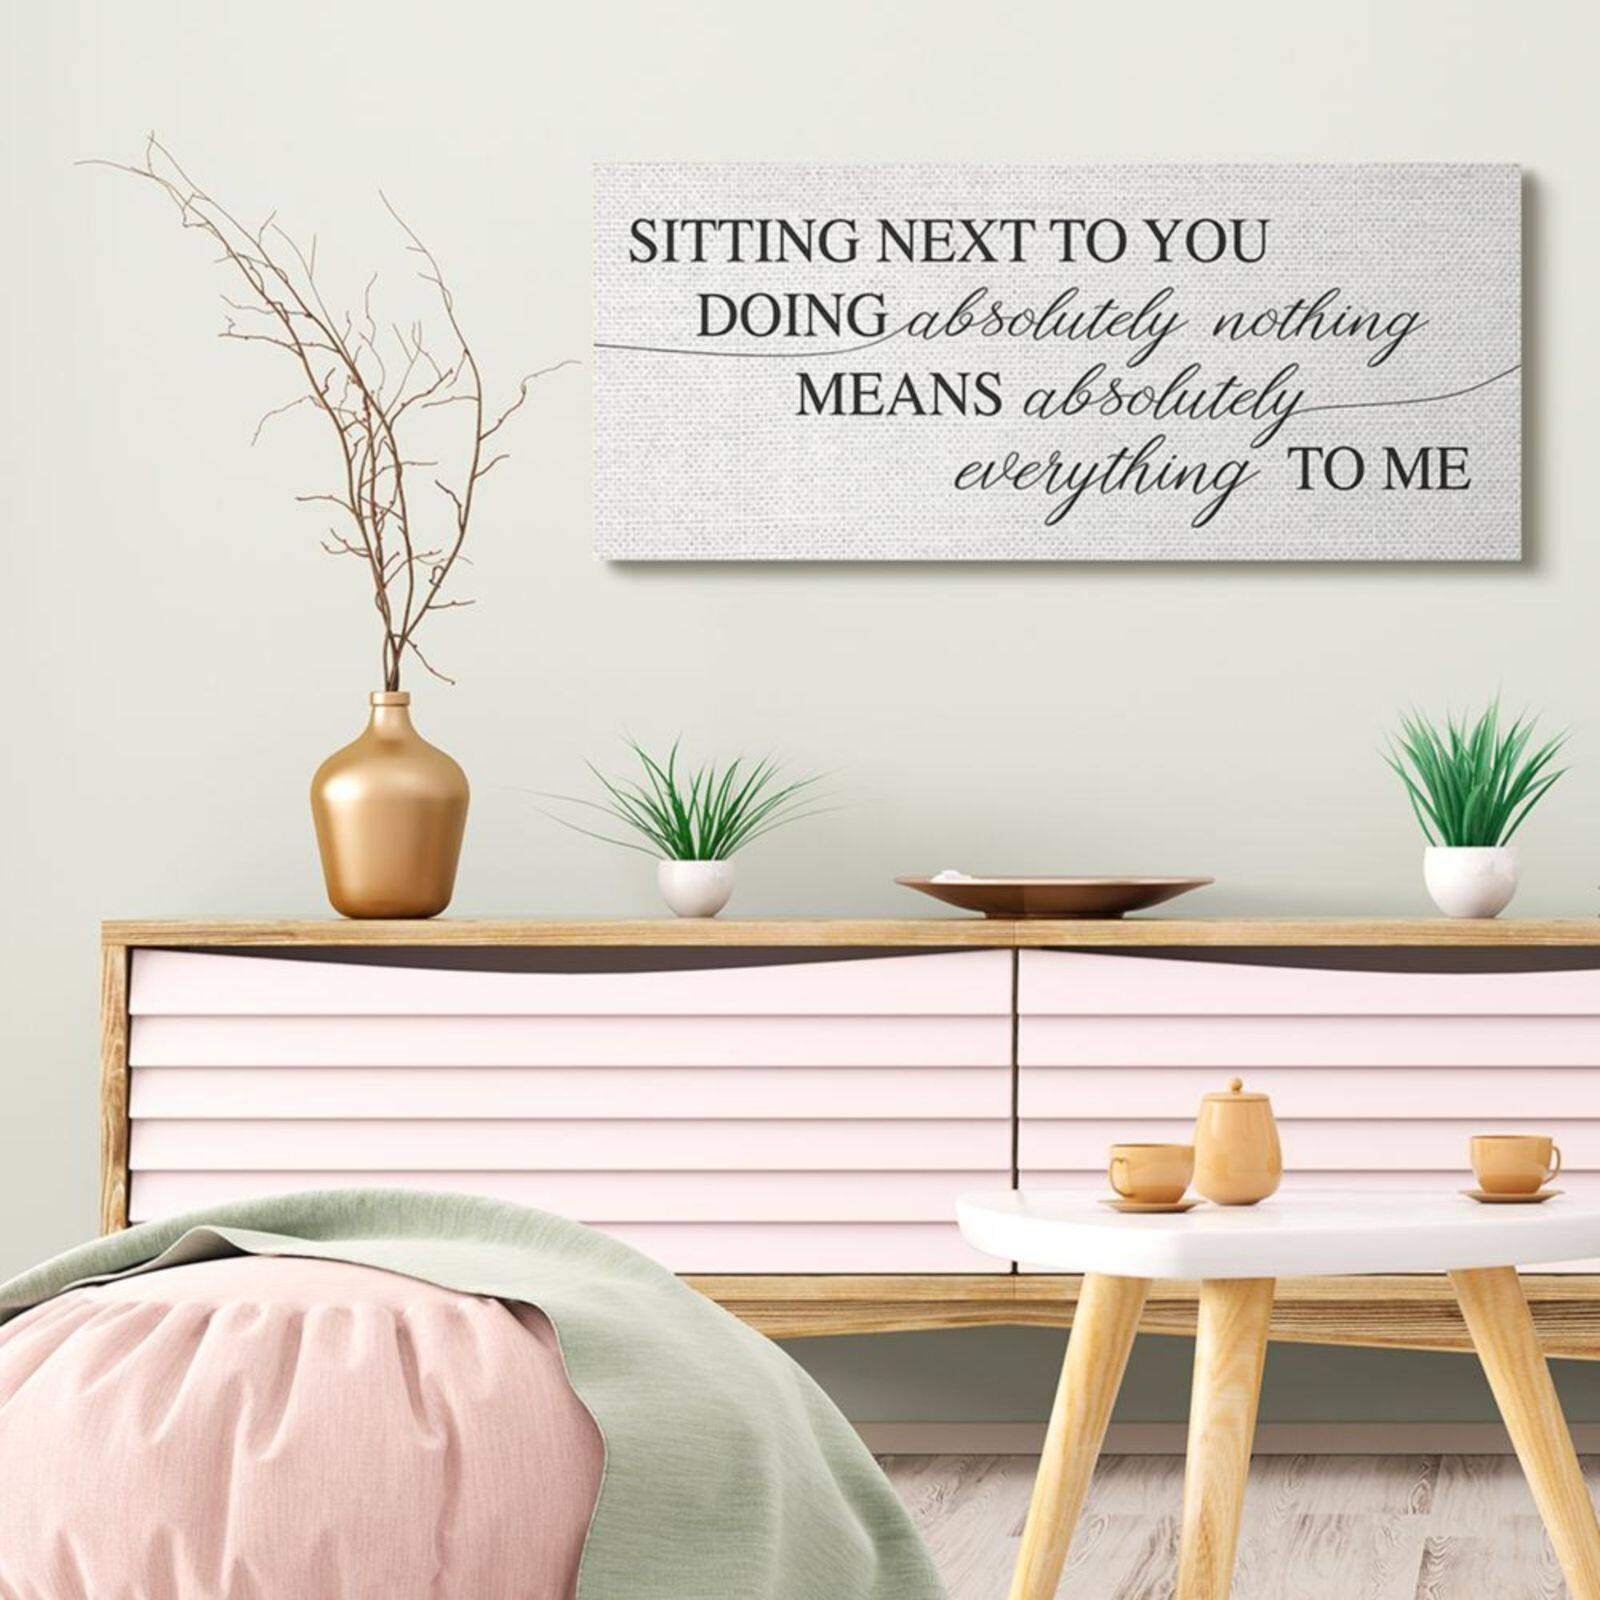 Stupell Industries Nothing Means Everything Phrase Wall Accent